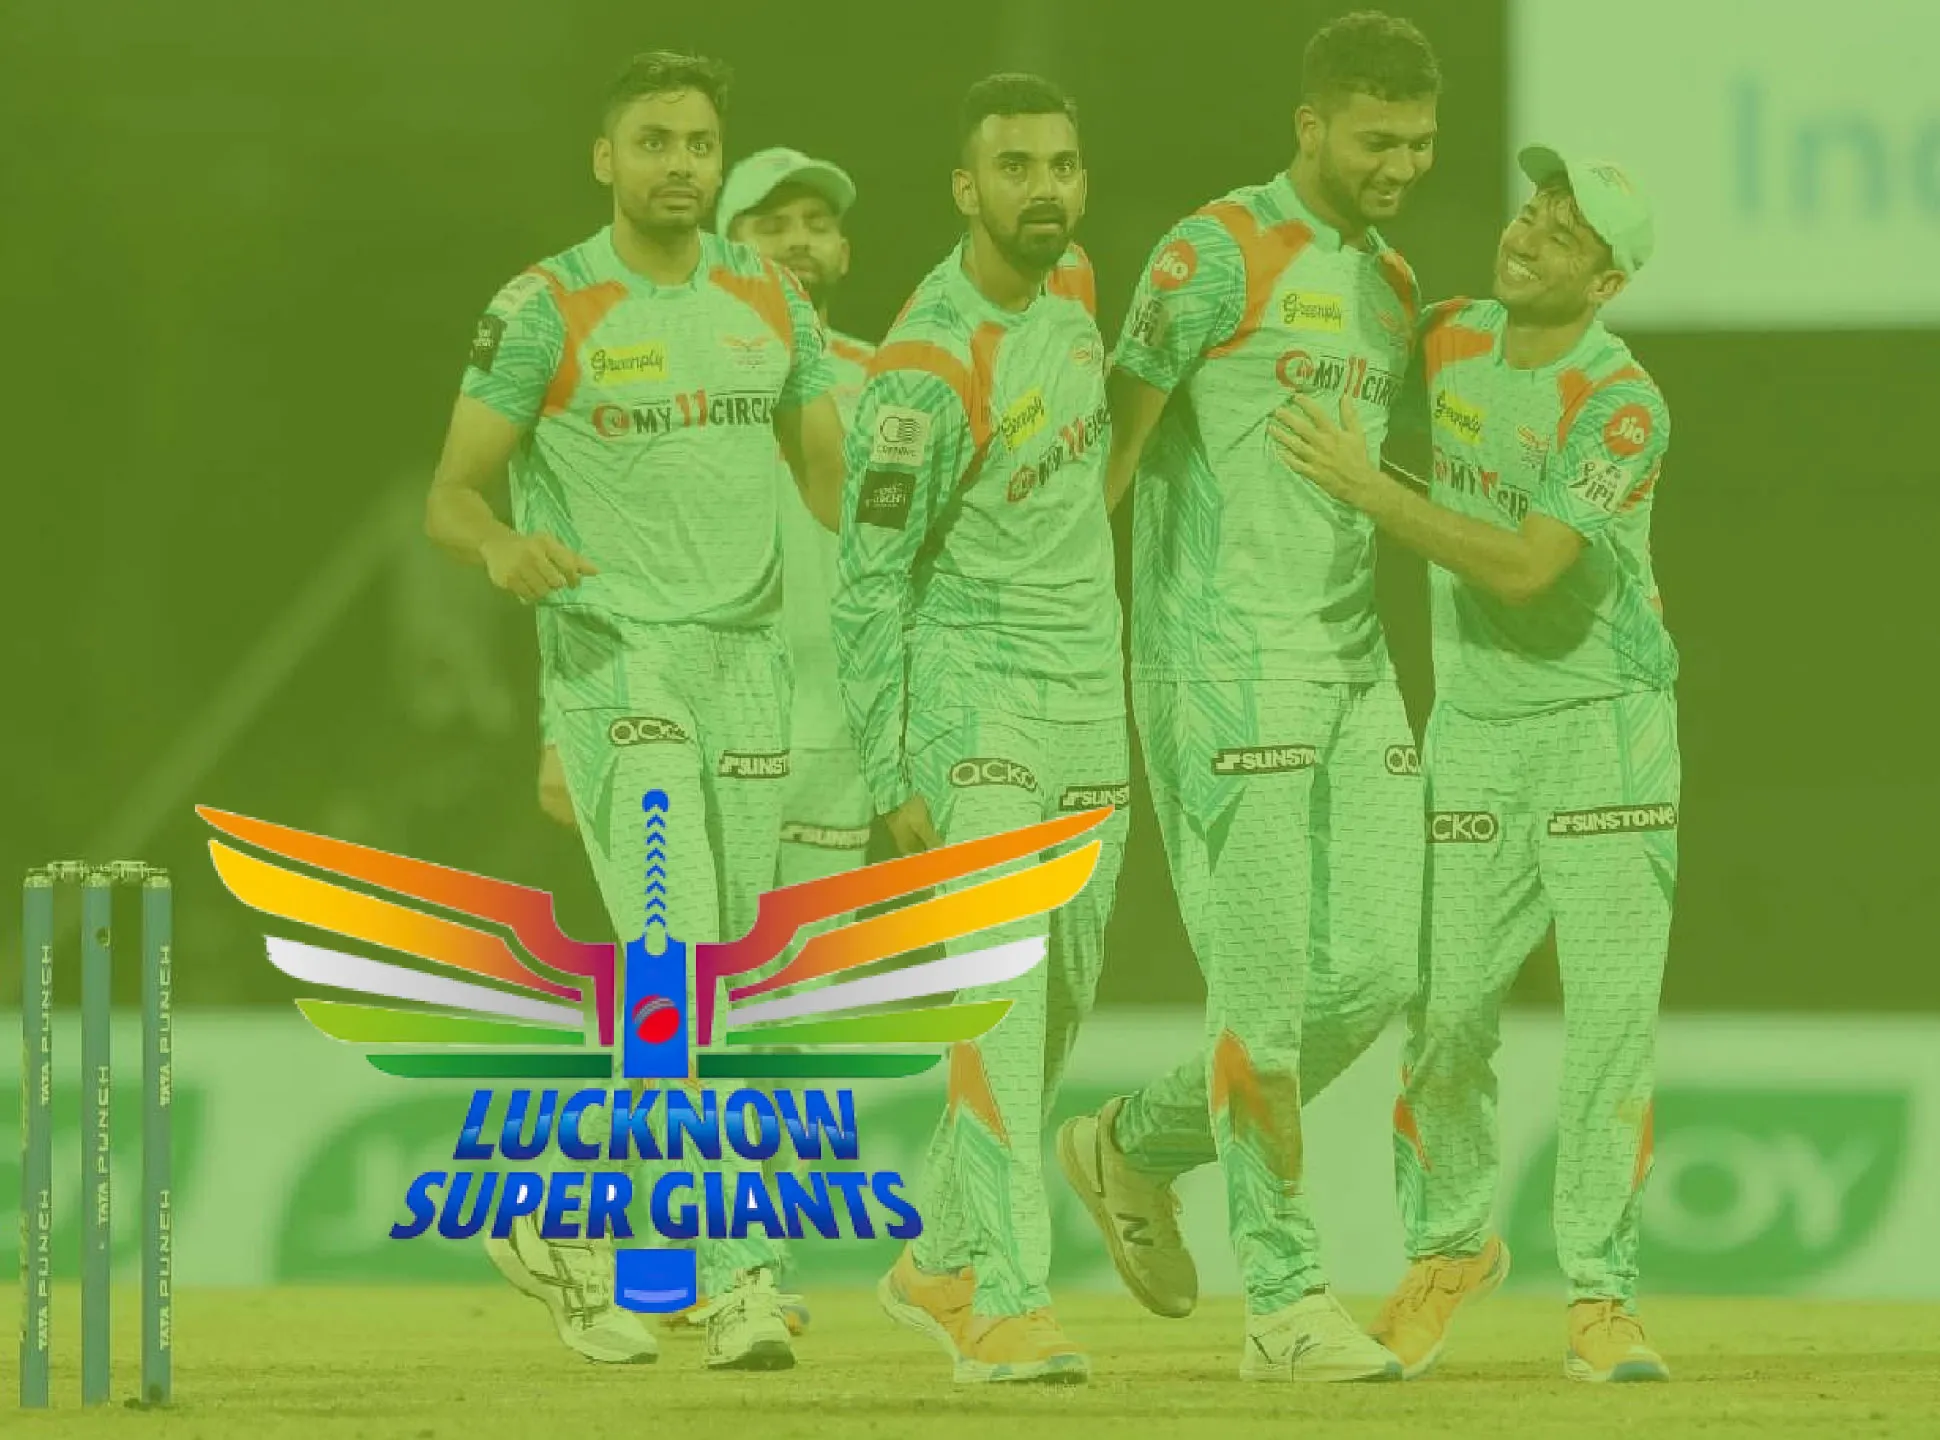 Lucknow Super Giants are almost new to IPL.